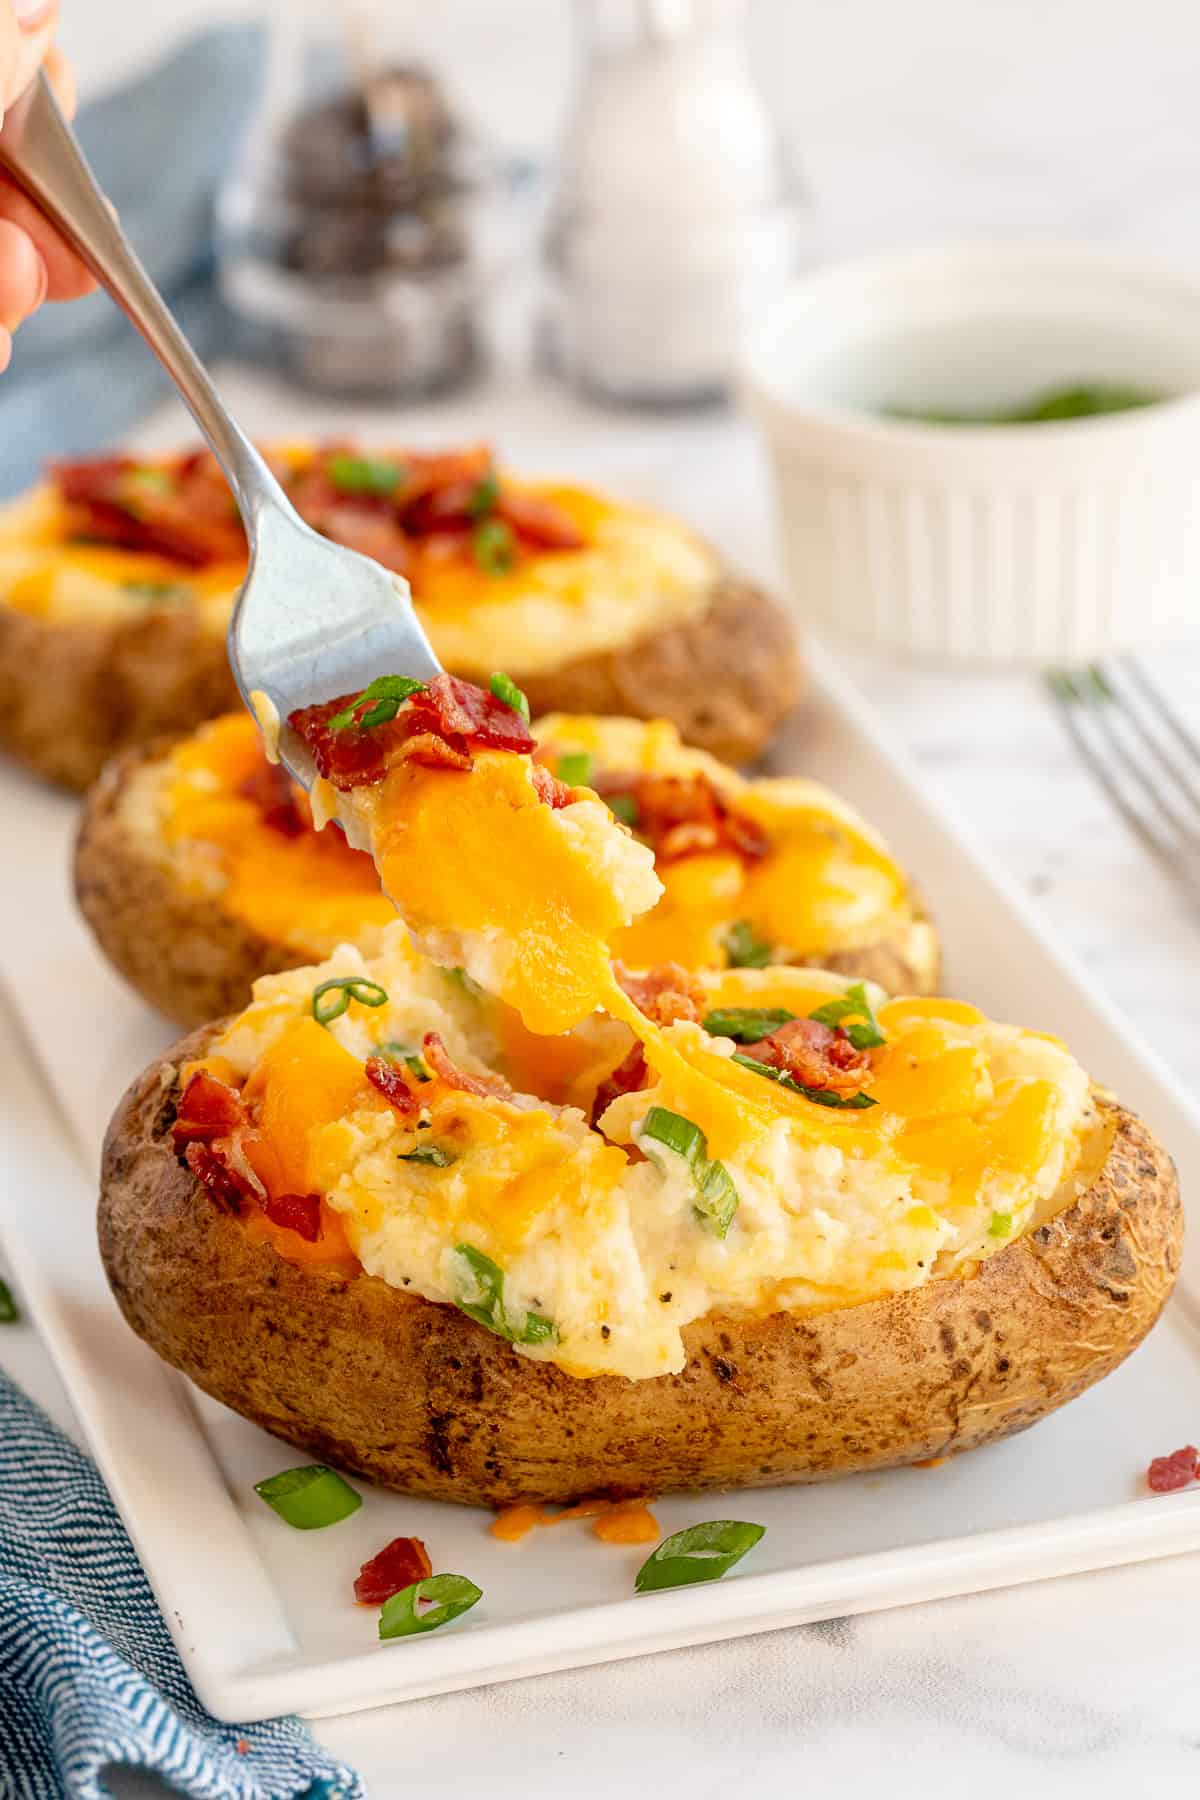 A fork lifts potato and melted cheese from a stuffed potato.